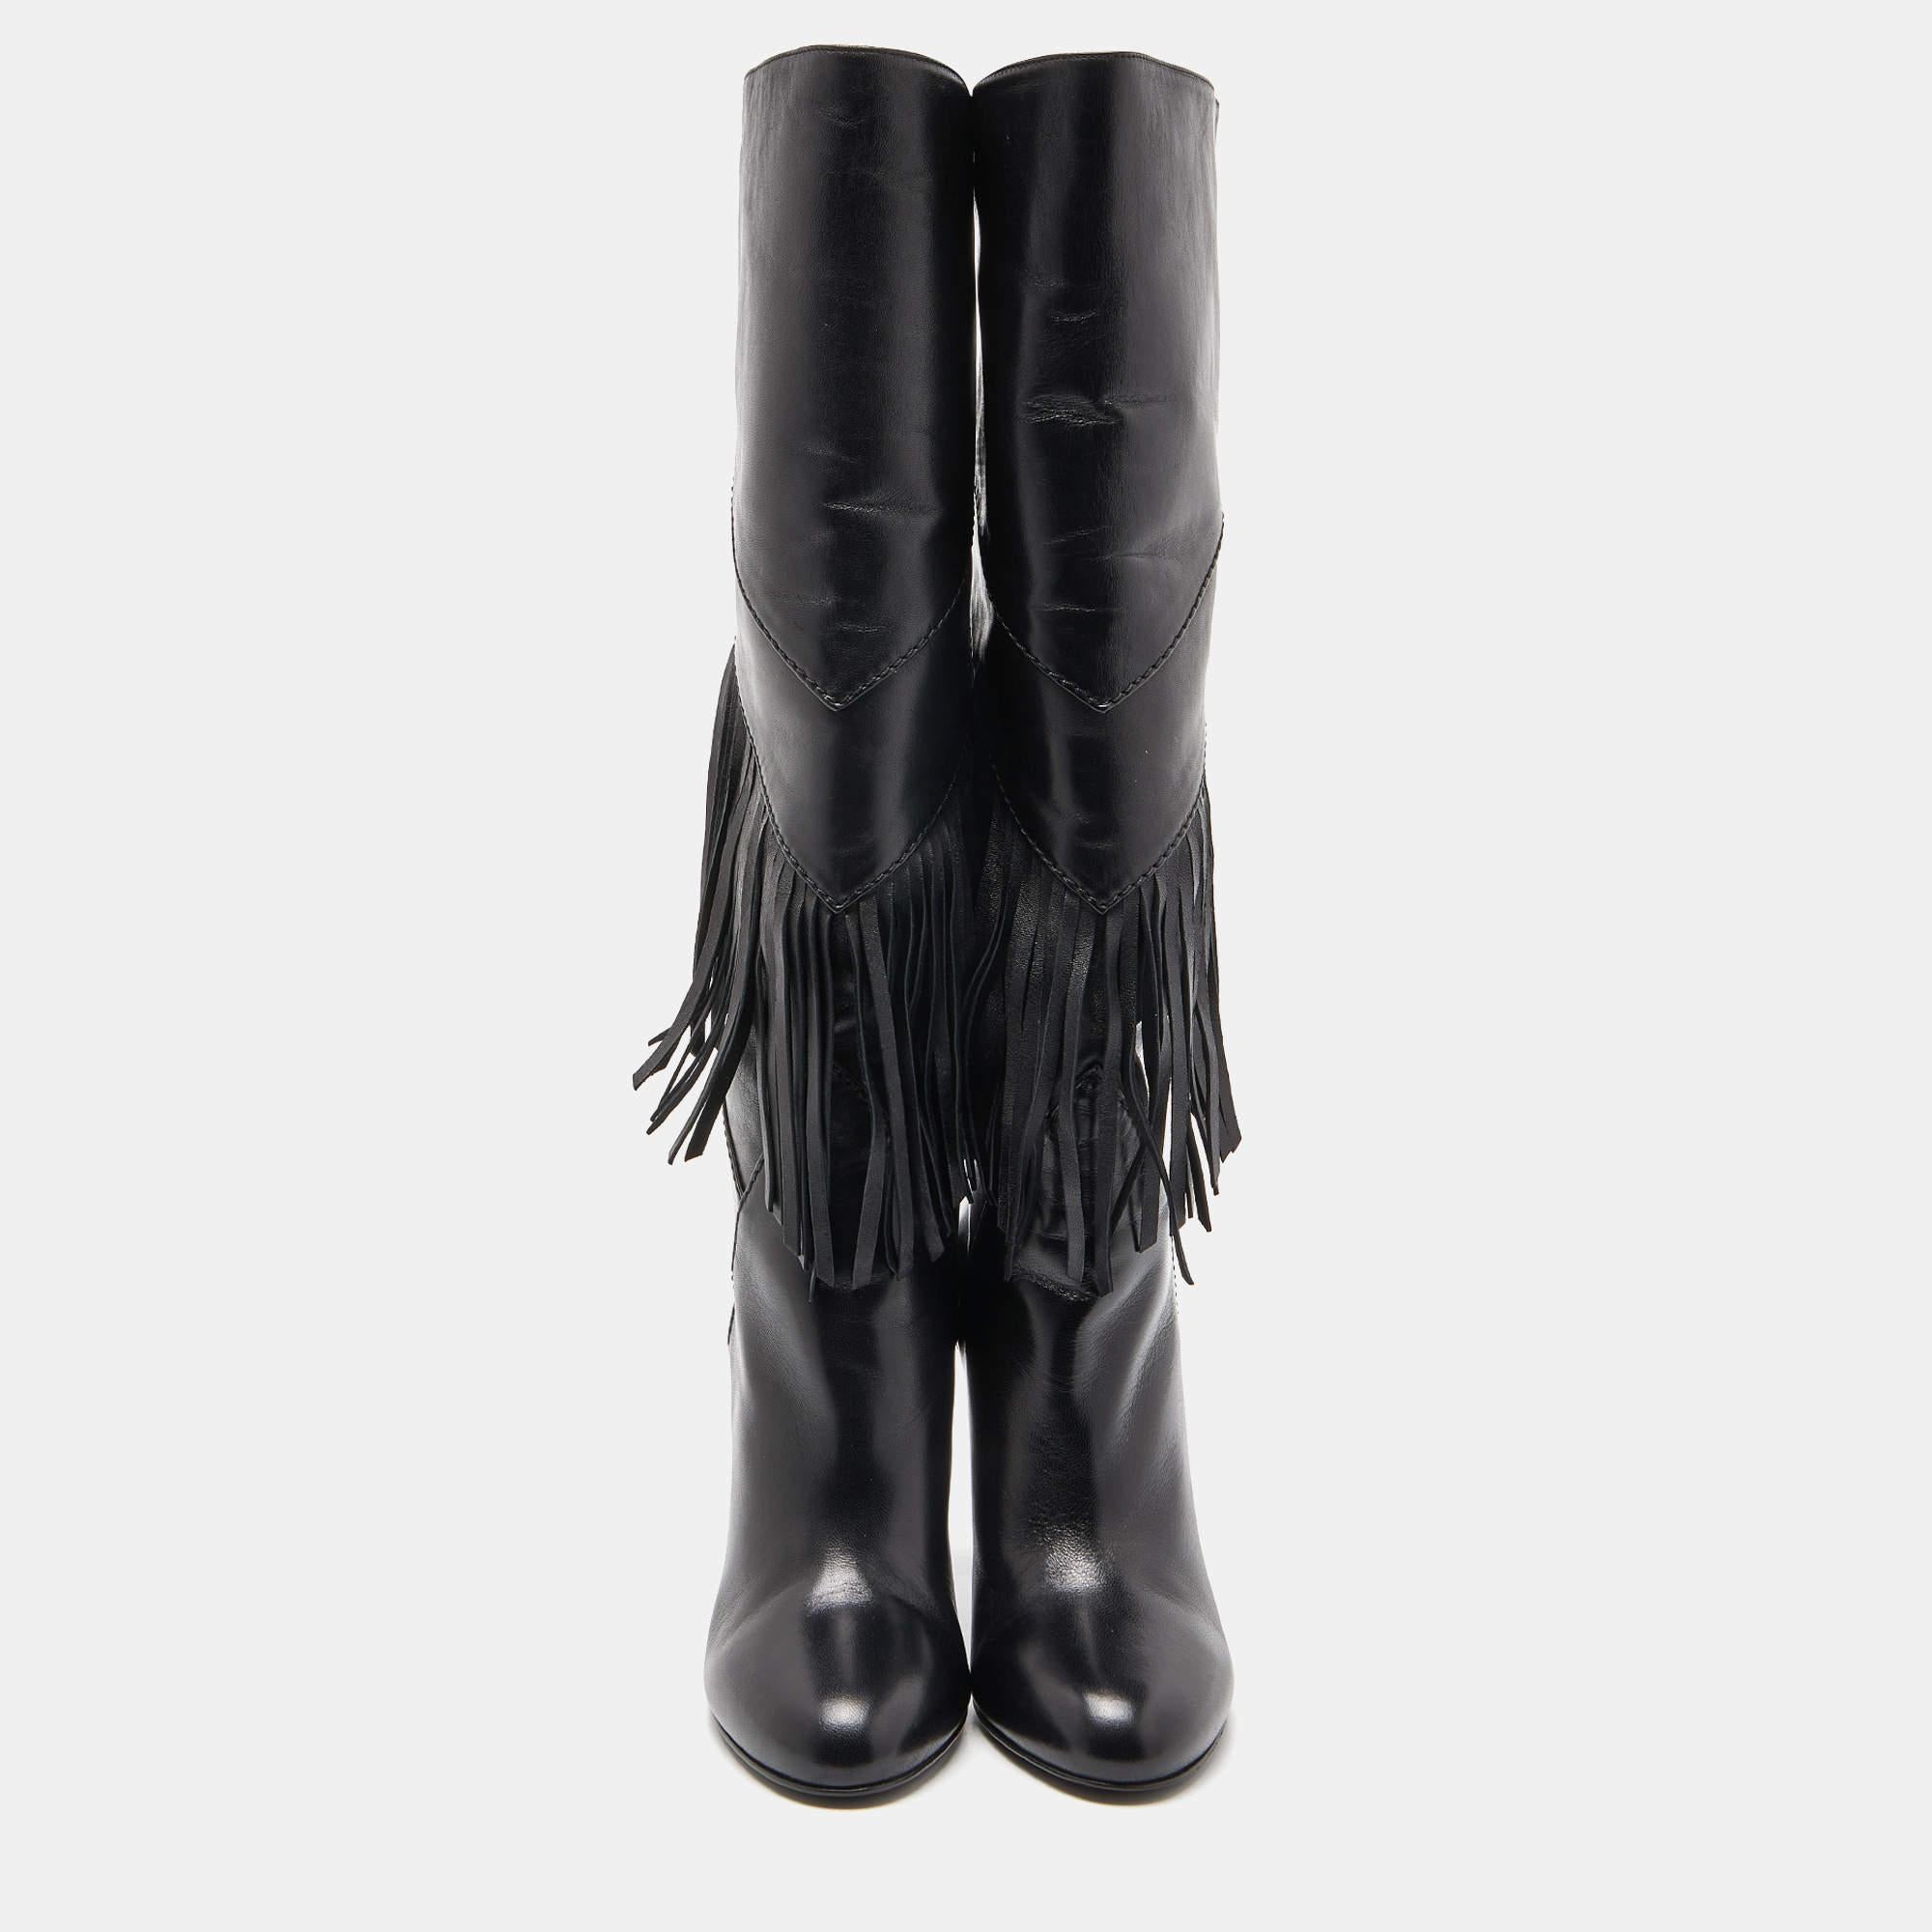 Stylish and perfect for a host of occasions, these Saint Laurent boots are must-haves! They have been crafted from black-hued leather and styled with fringes and 10.5 cm heels.

Includes: Original Box, Original Dustbag, Extra Heel Tips

